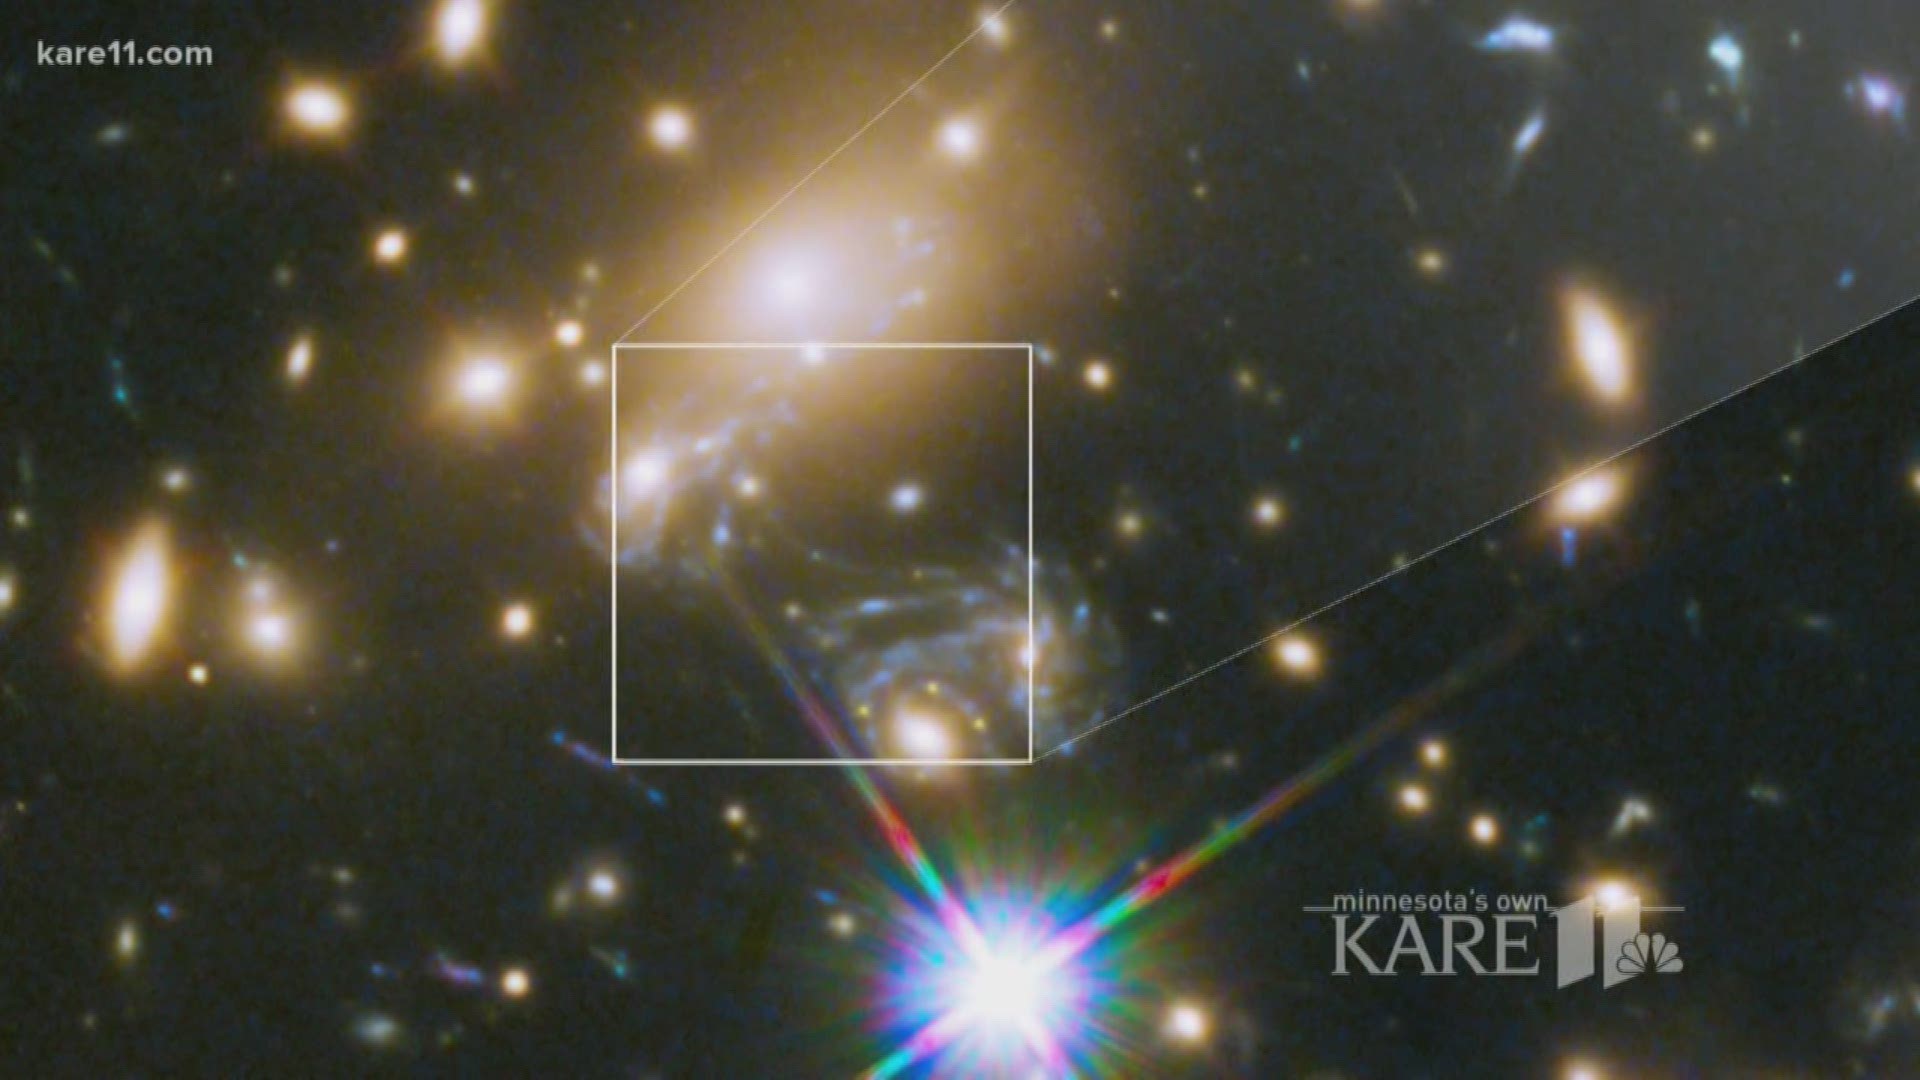 Researchers at the U of M just discovered Icarus, the farthest individual star ever seen. Its discovery was by accident. https://kare11.tv/2Iqpz87